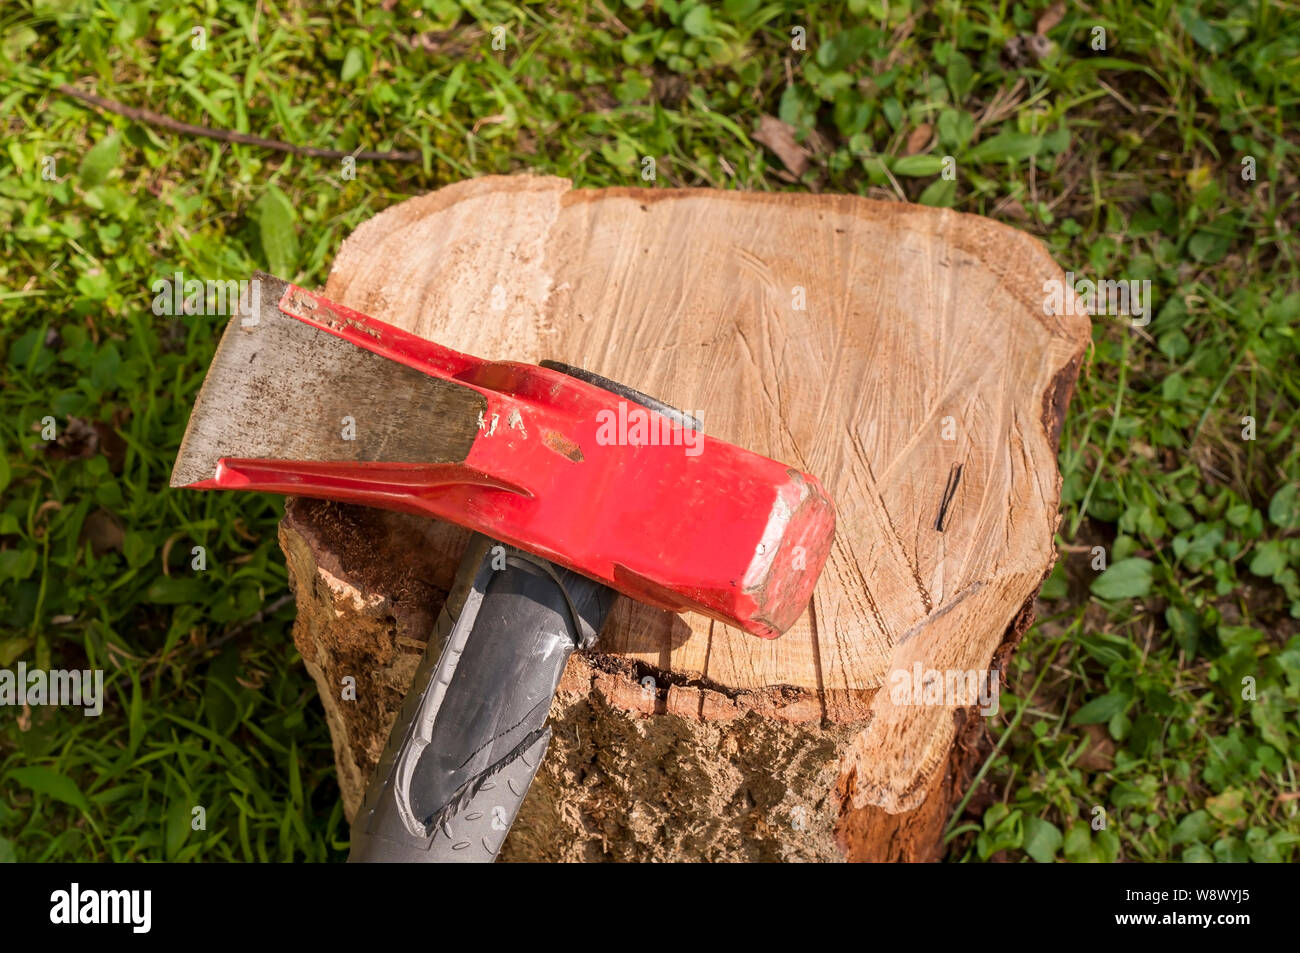 A wood splitting maul on top of a wooden log with grass in the background Stock Photo